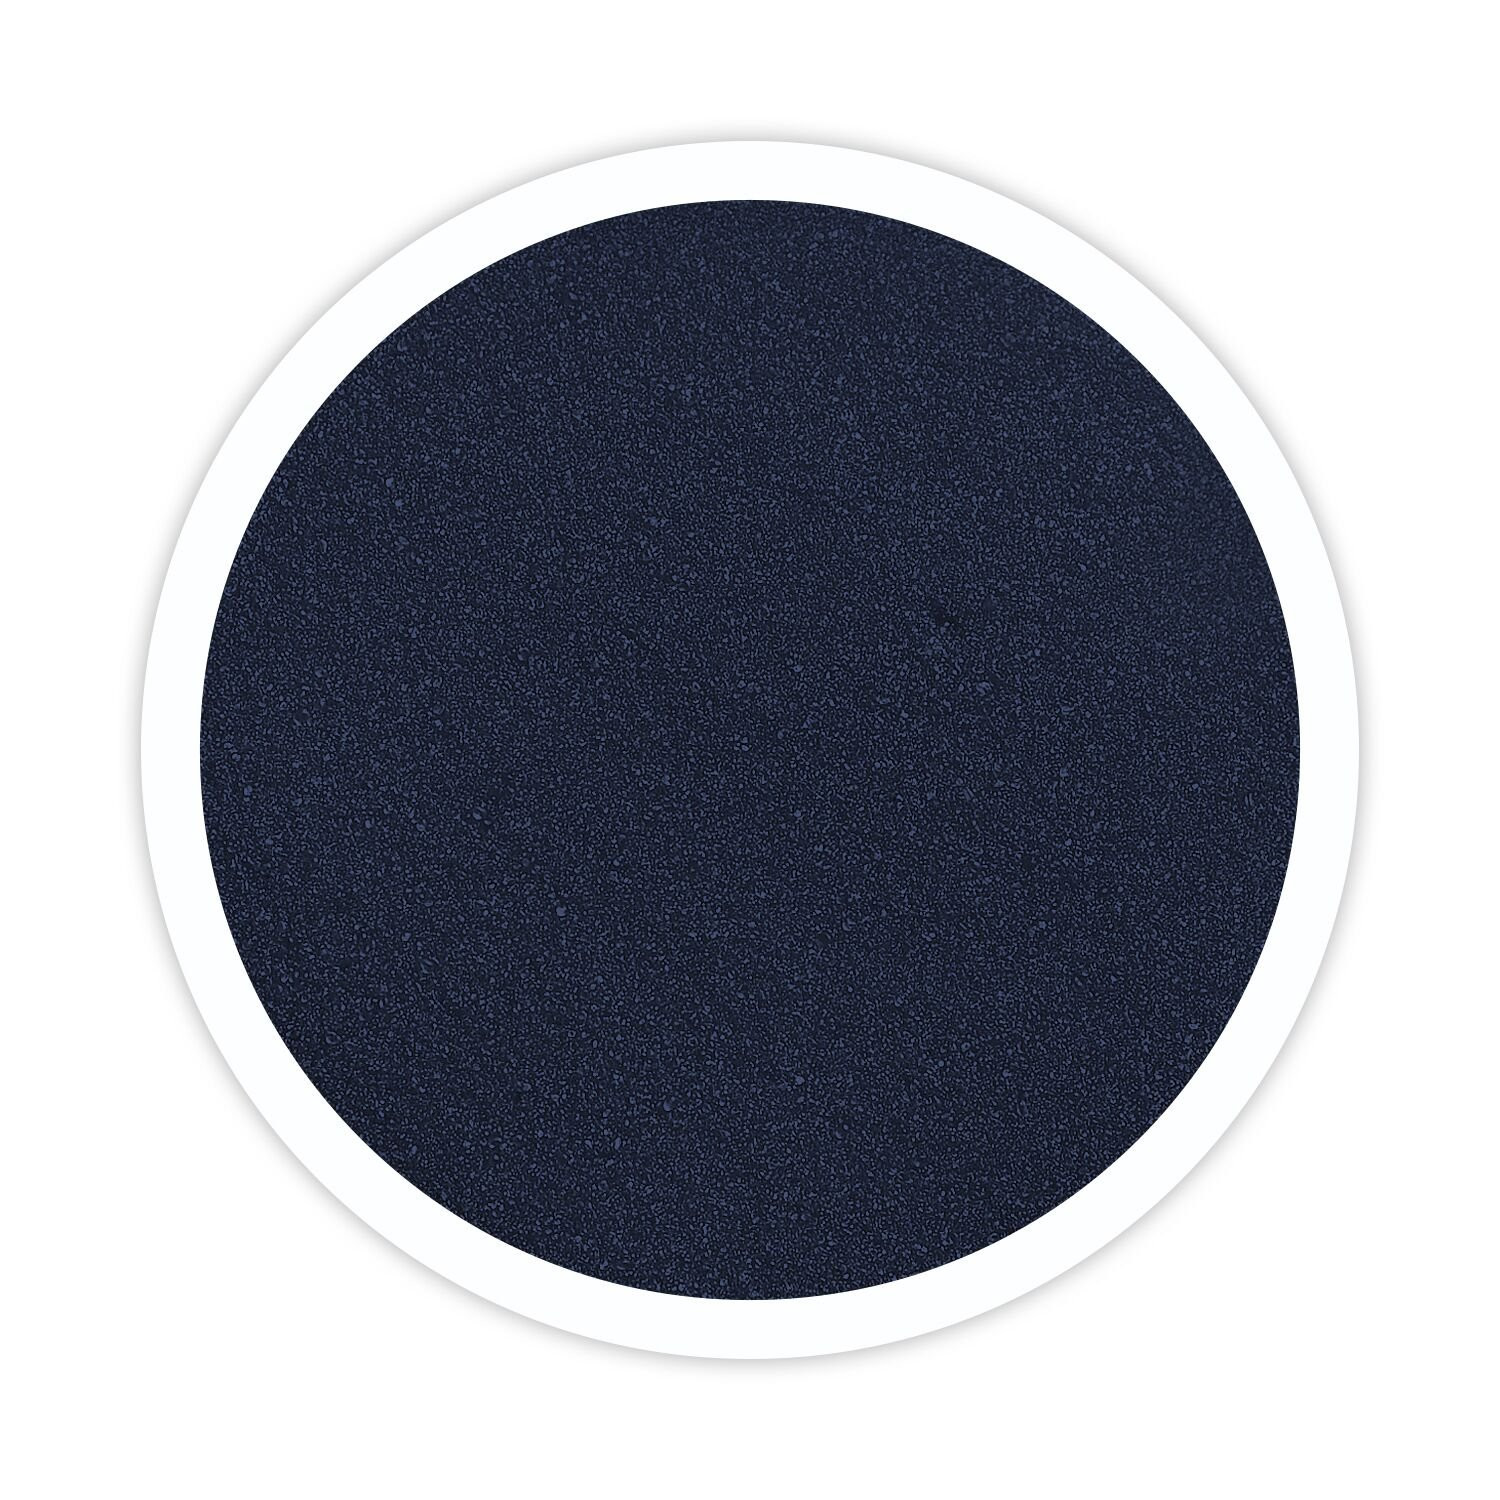 23 Unique Navy Blue Vases wholesale 2024 free download navy blue vases wholesale of amazon com black wedding unity sand shadow box set with inside sandsational navy blue marine unity sand 1 pound colored sand for weddings